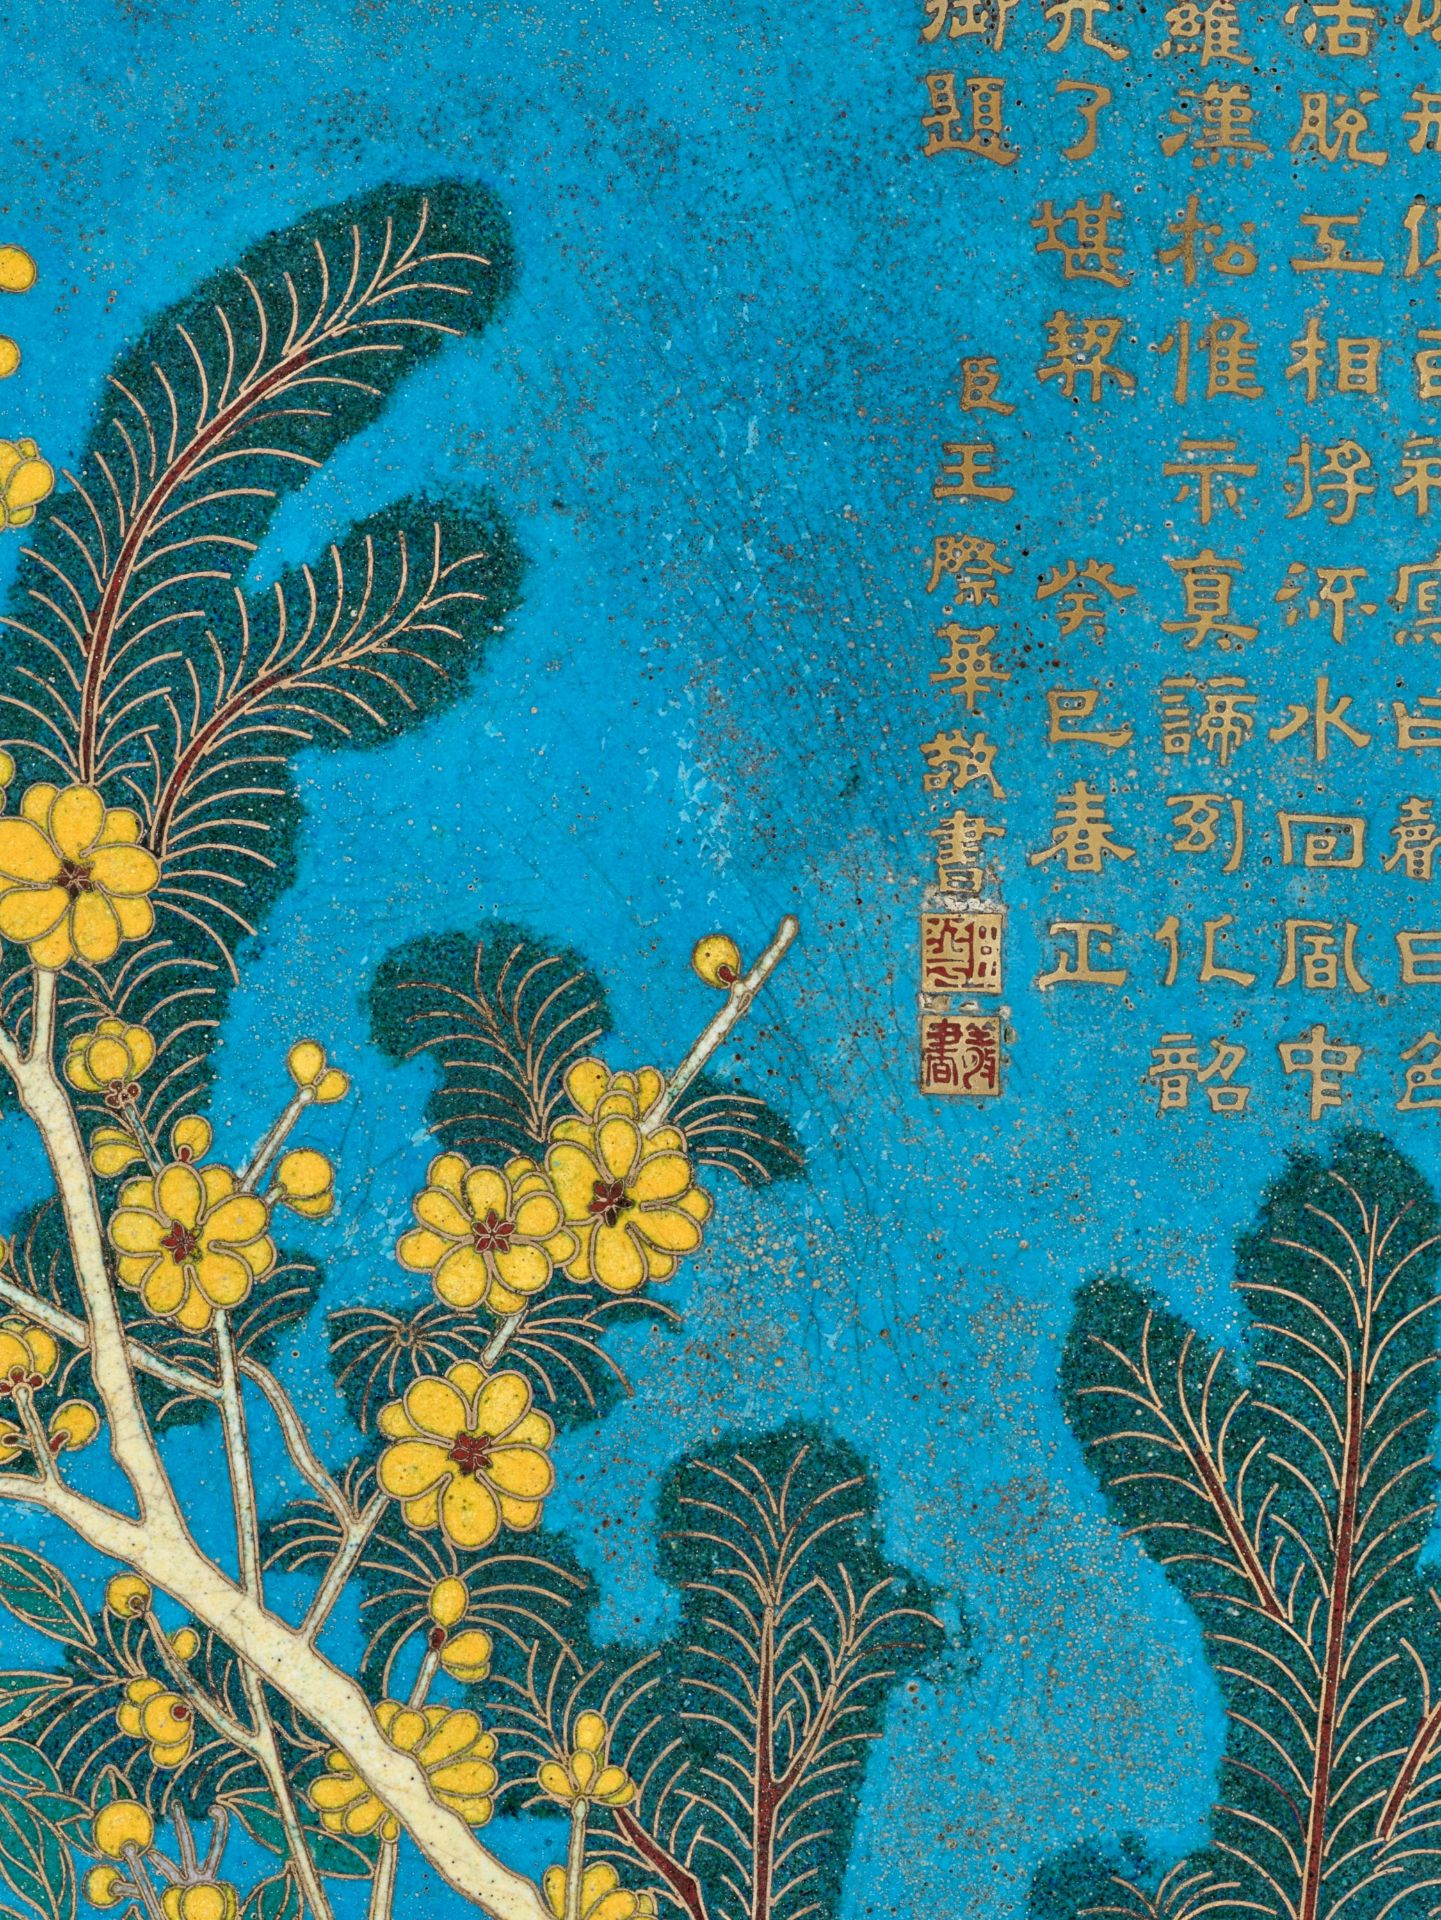 A CLOISONNE PANEL, INSCRIBED WITH A POEM BY THE QIANLONG EMPEROR - Image 6 of 7